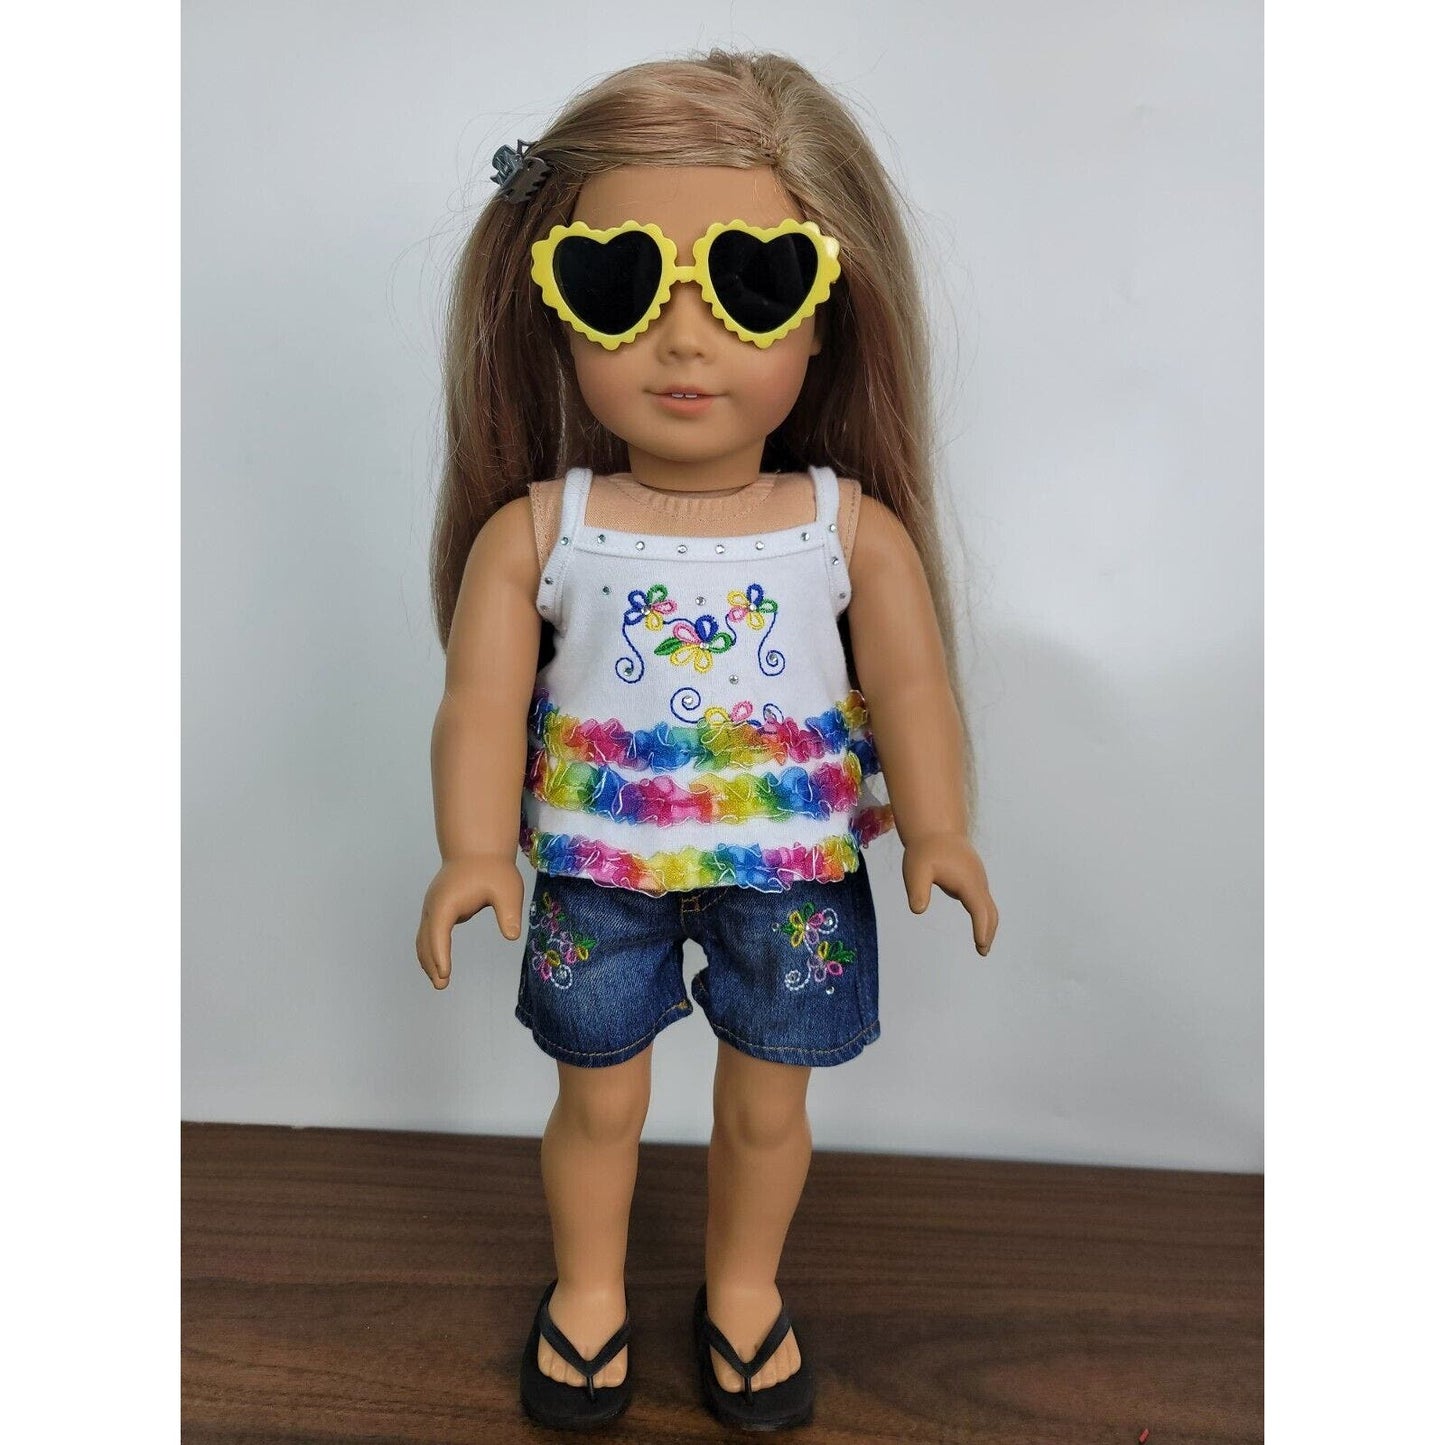 Doll Summer Outfit Floral Glasses Shoes fits American Girl 18" Outing Play Set